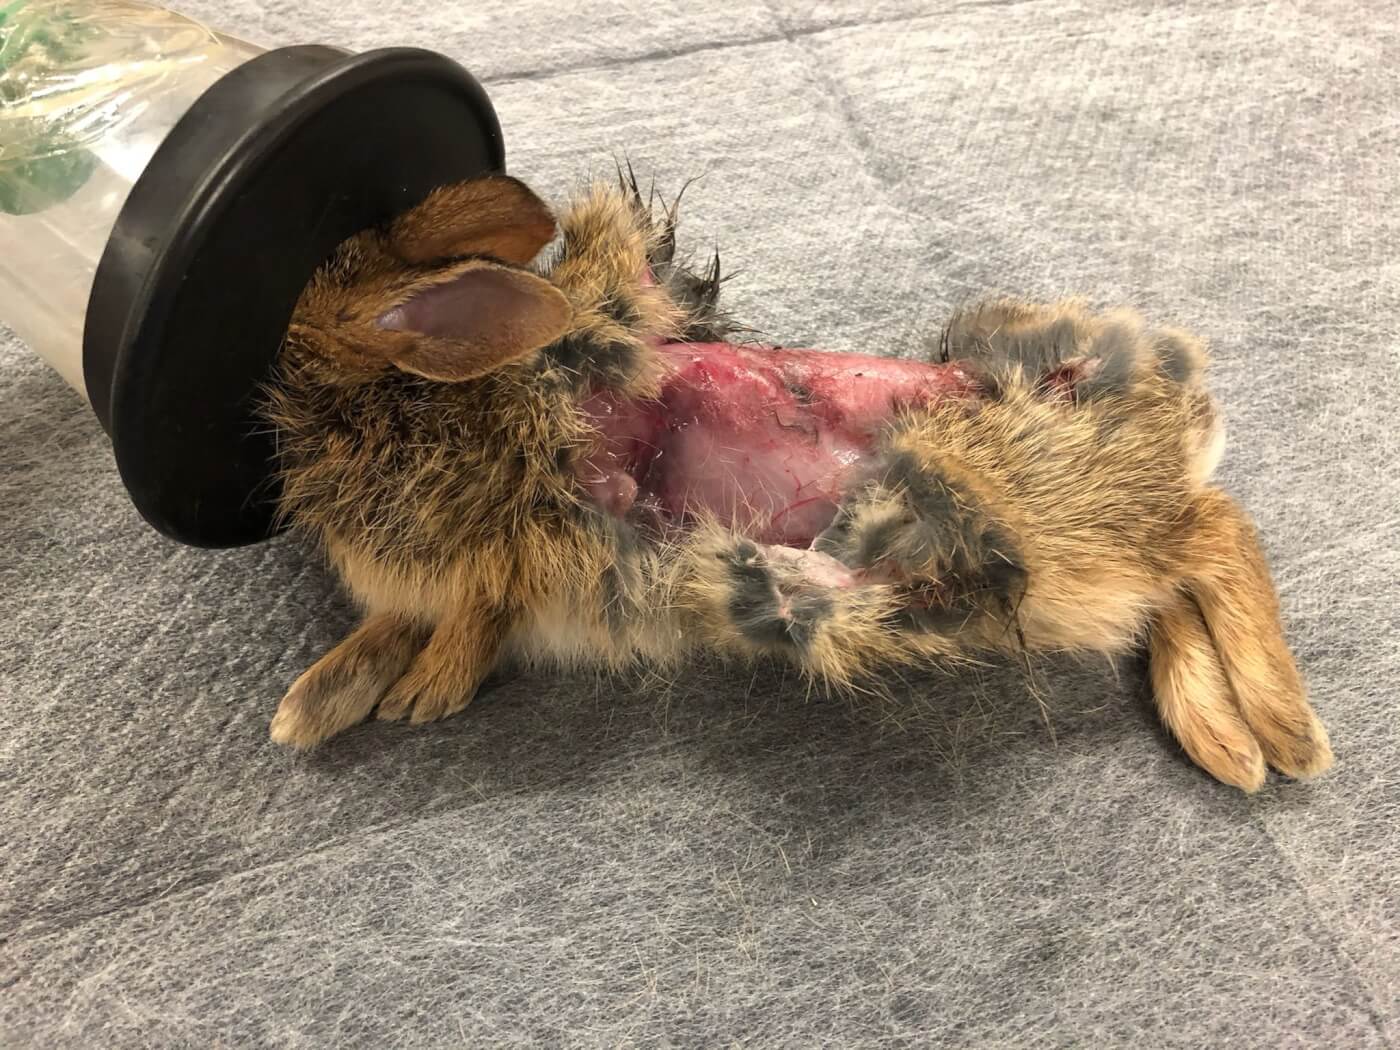 Rabbit skinned alive by outdoor cats